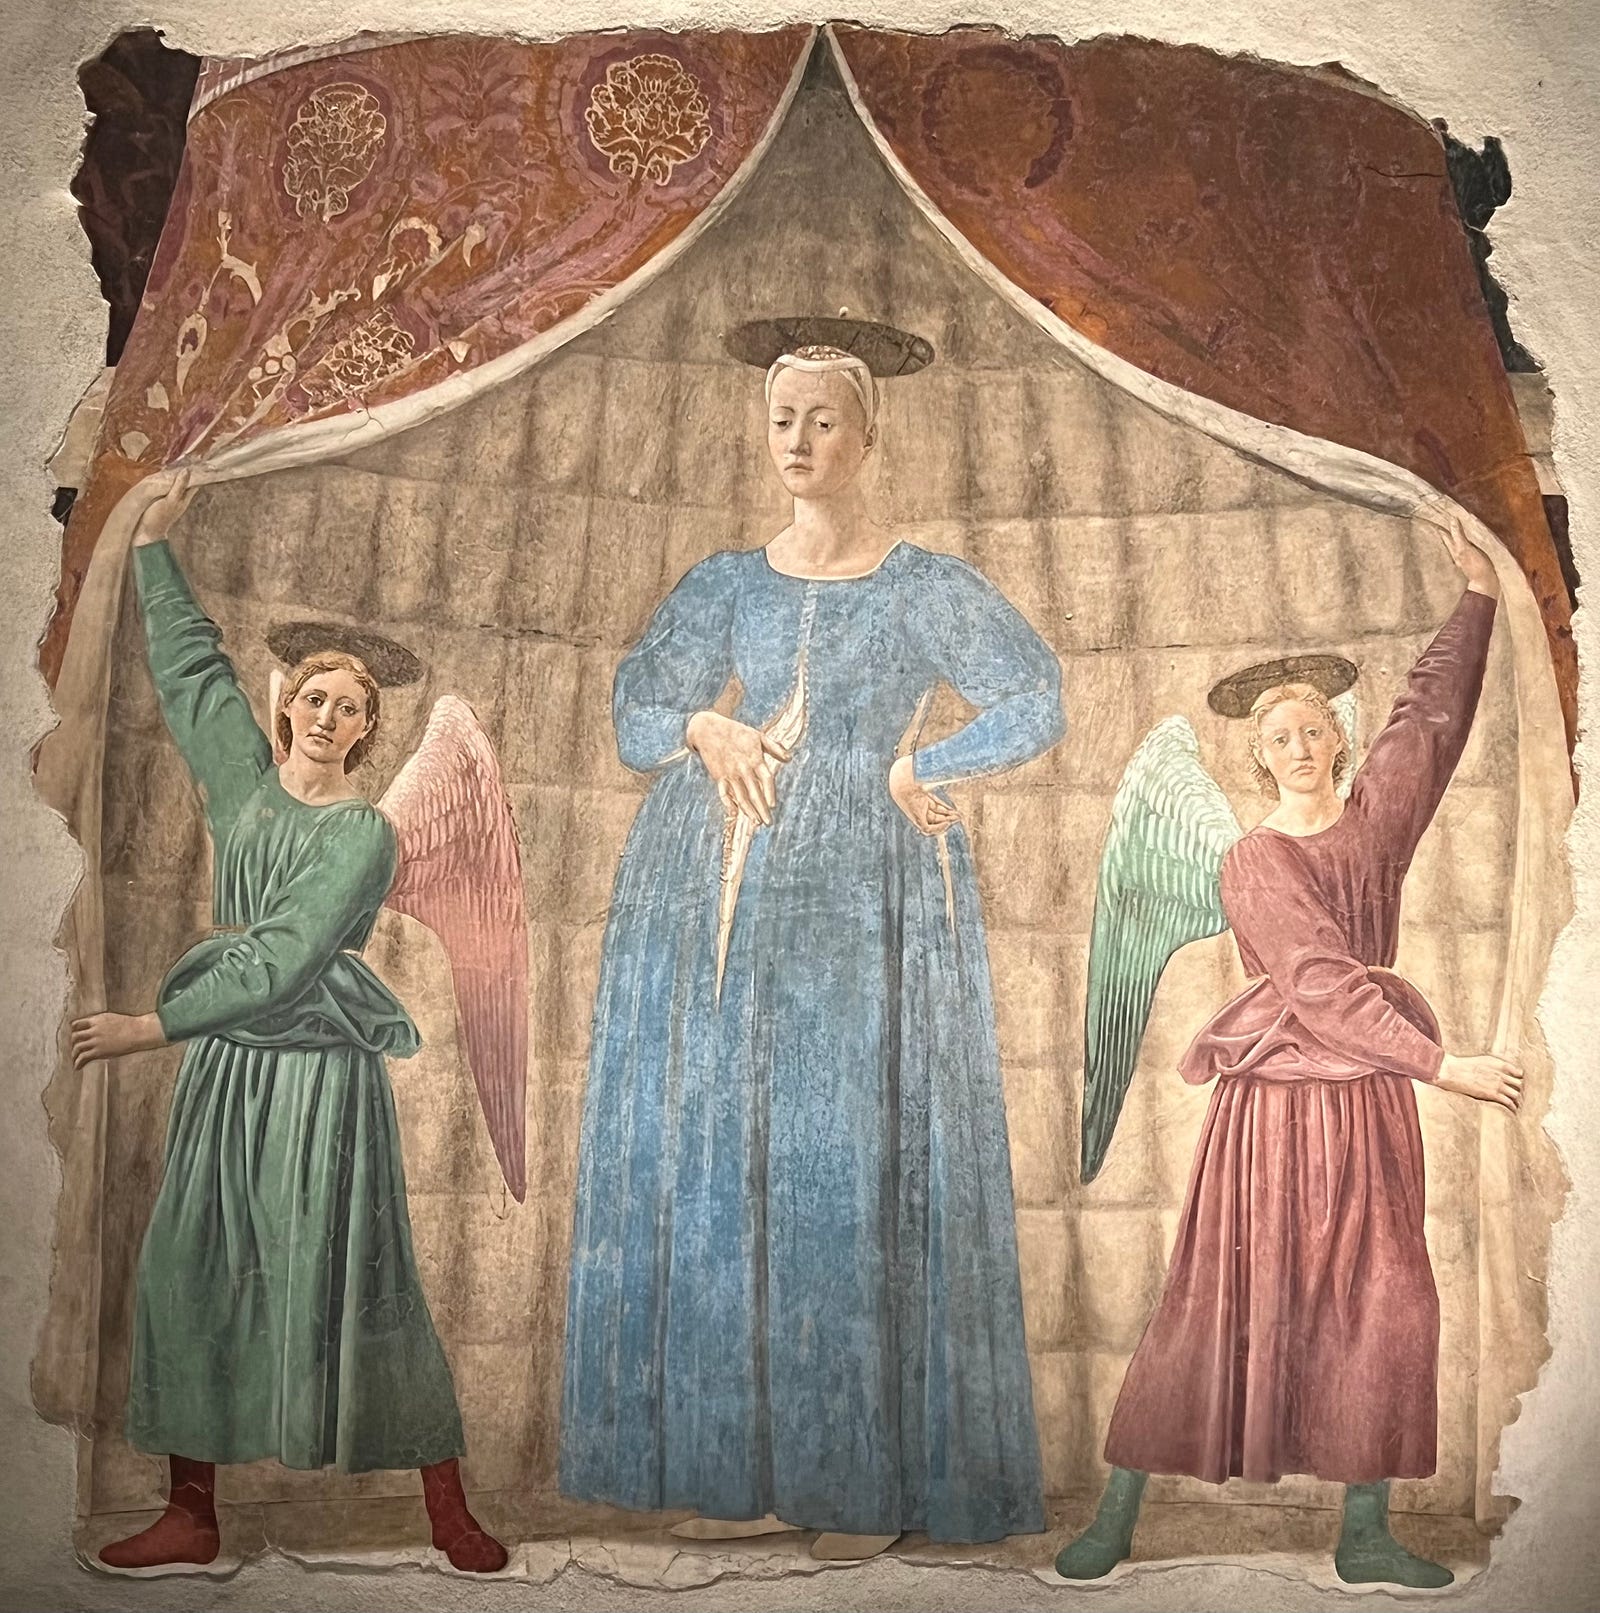 Photo of the fresco Madonna del Parto of Monterchi by Piero della Francesca (c 1460), showing a very pregant mary in blue frock, stading within a tented encousure whose flaps are held open by a pair of angels who look directly into the viewer’s eyes.